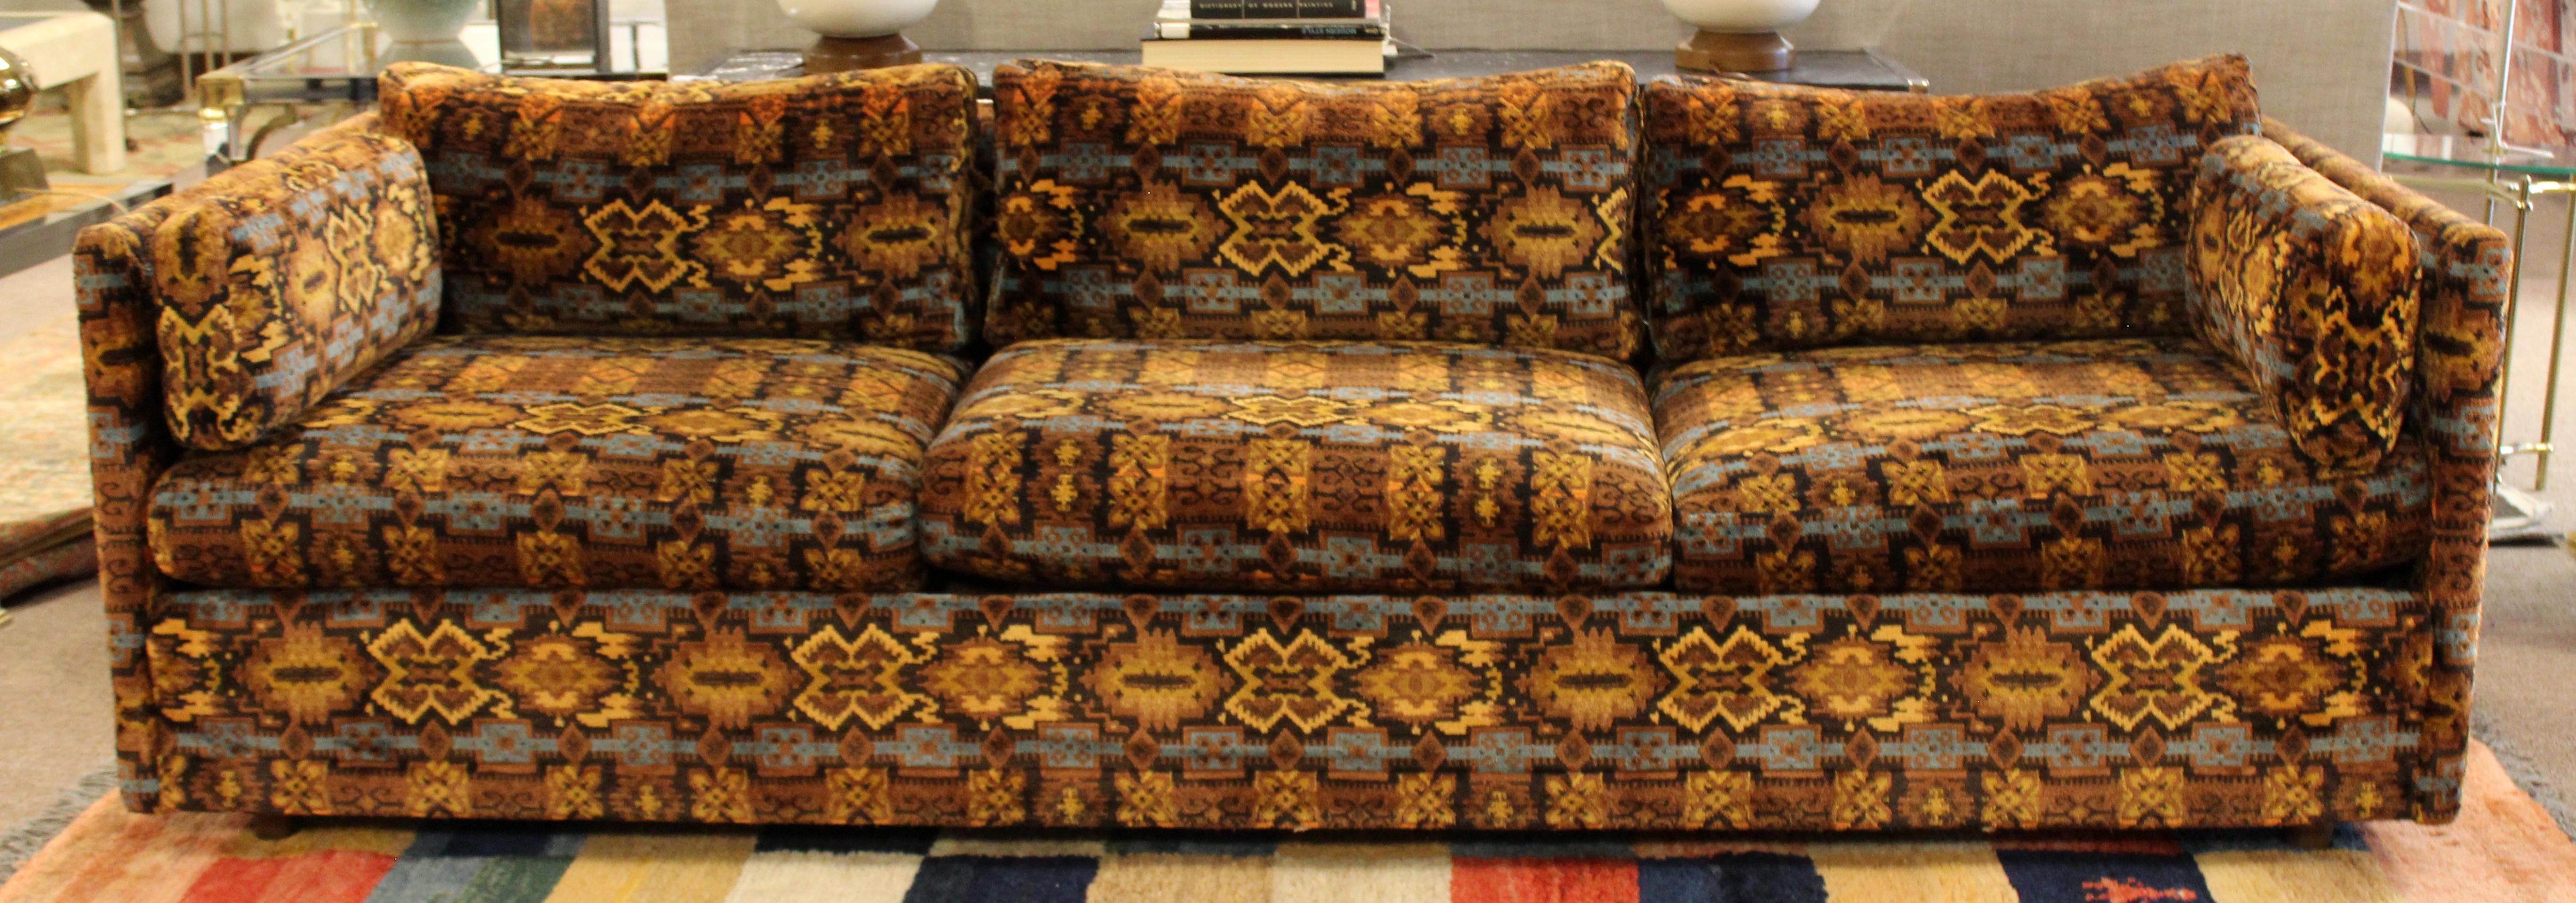 For your consideration is a spectacular sofa, by Milo Baughman, with Jack Lenor Larsen style fabric, circa 1960s. In excellent vintage condition. The dimensions are 91